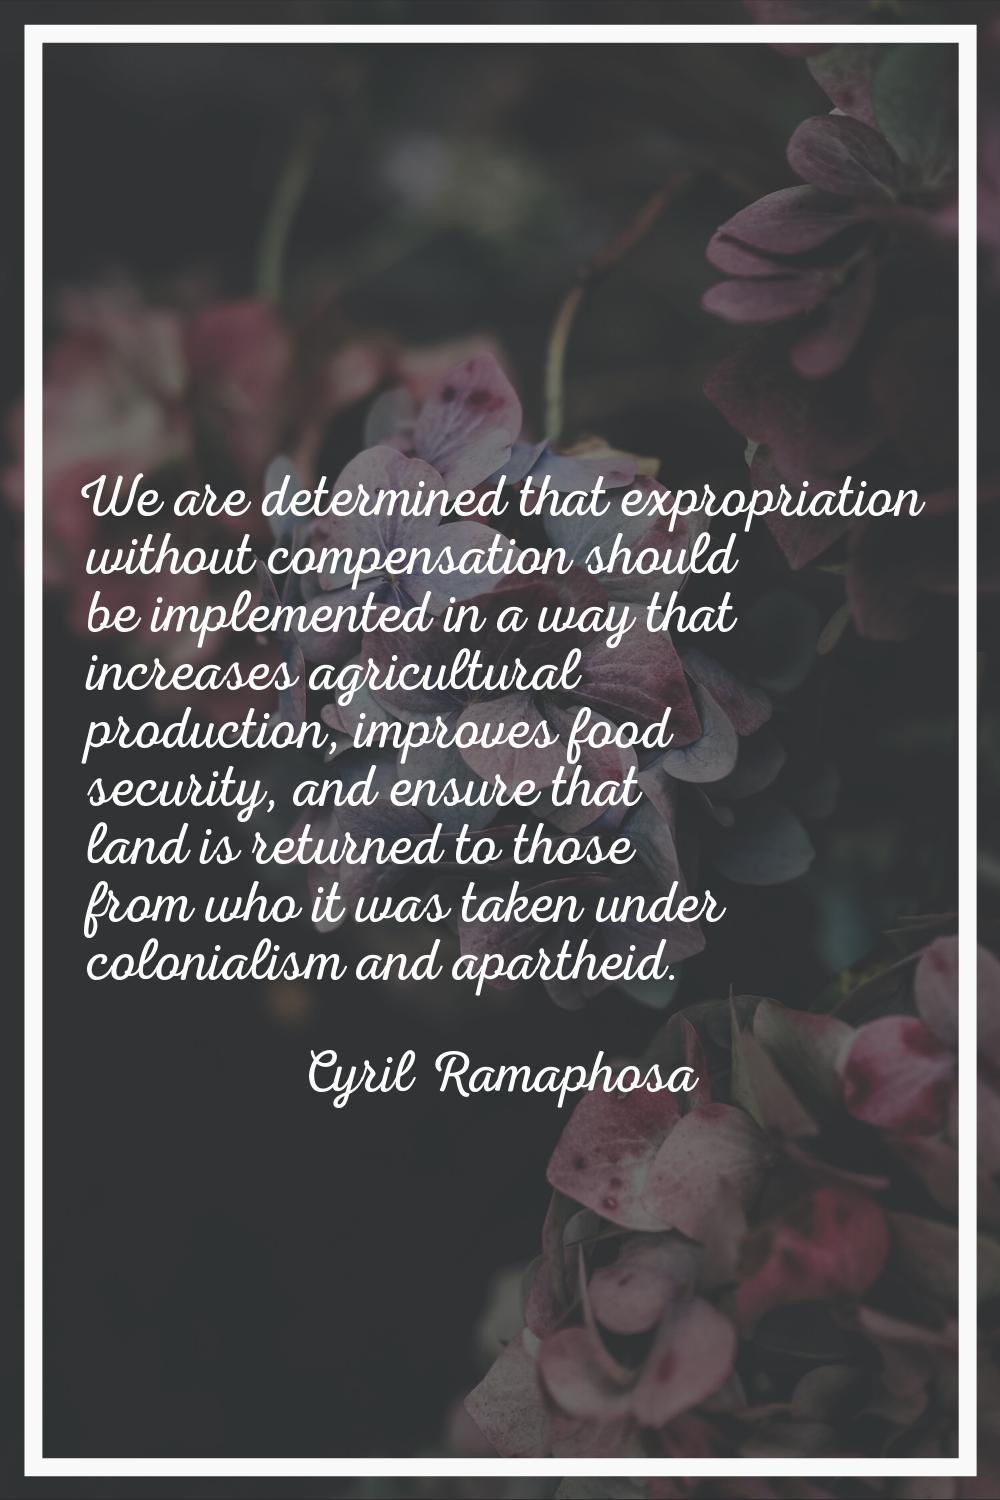 We are determined that expropriation without compensation should be implemented in a way that incre